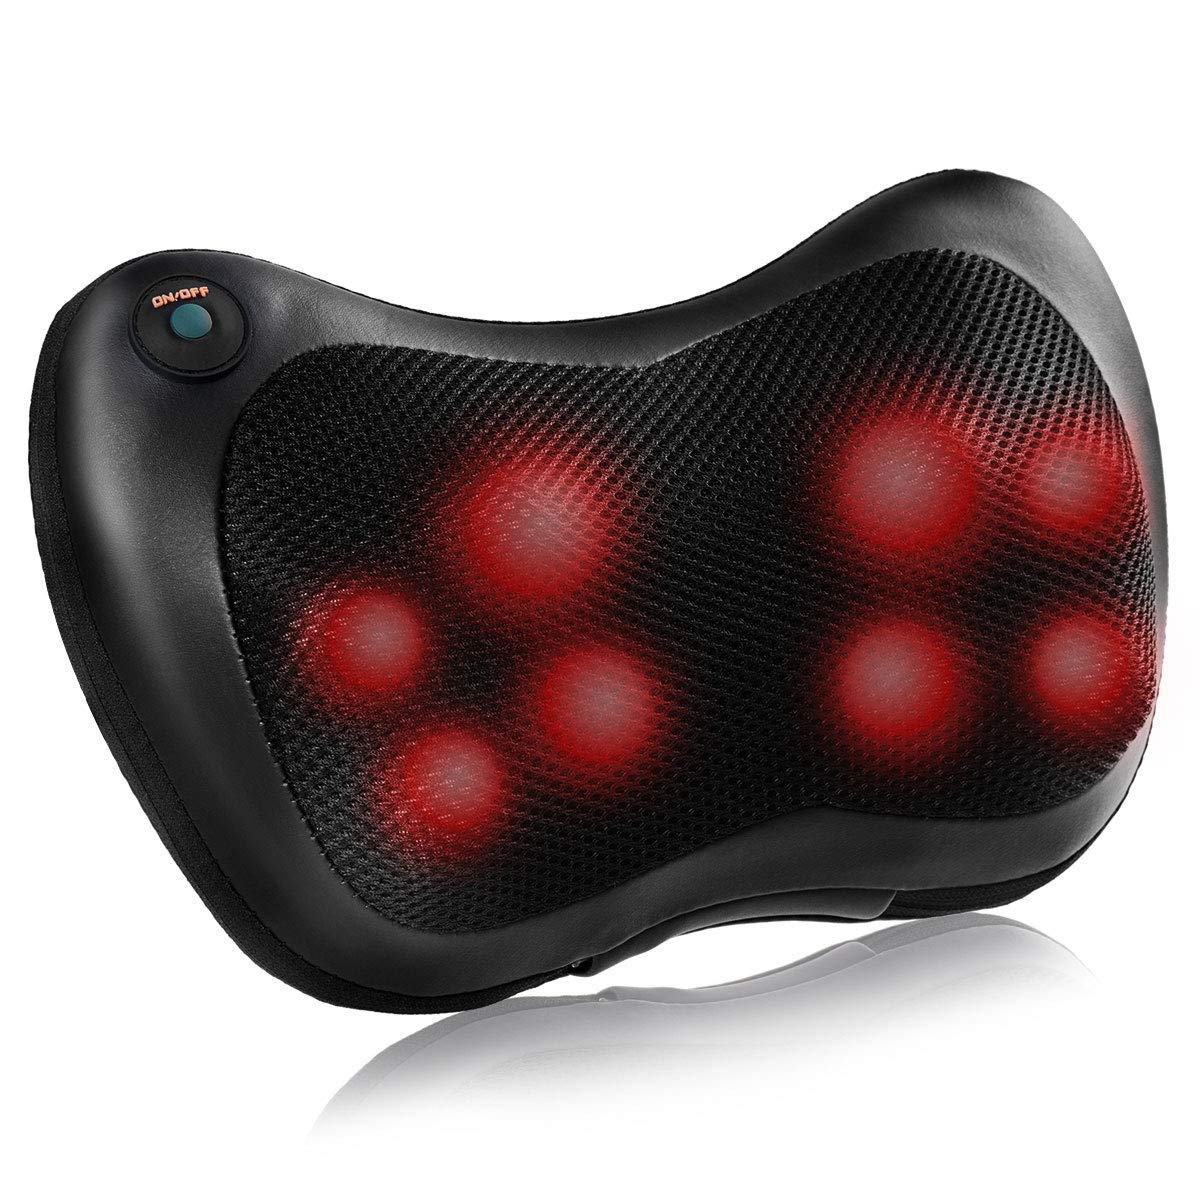 Giantex Shiatsu Back Neck Massager with Heat, Kneading Massage Pillow for Muscle Pain Relief